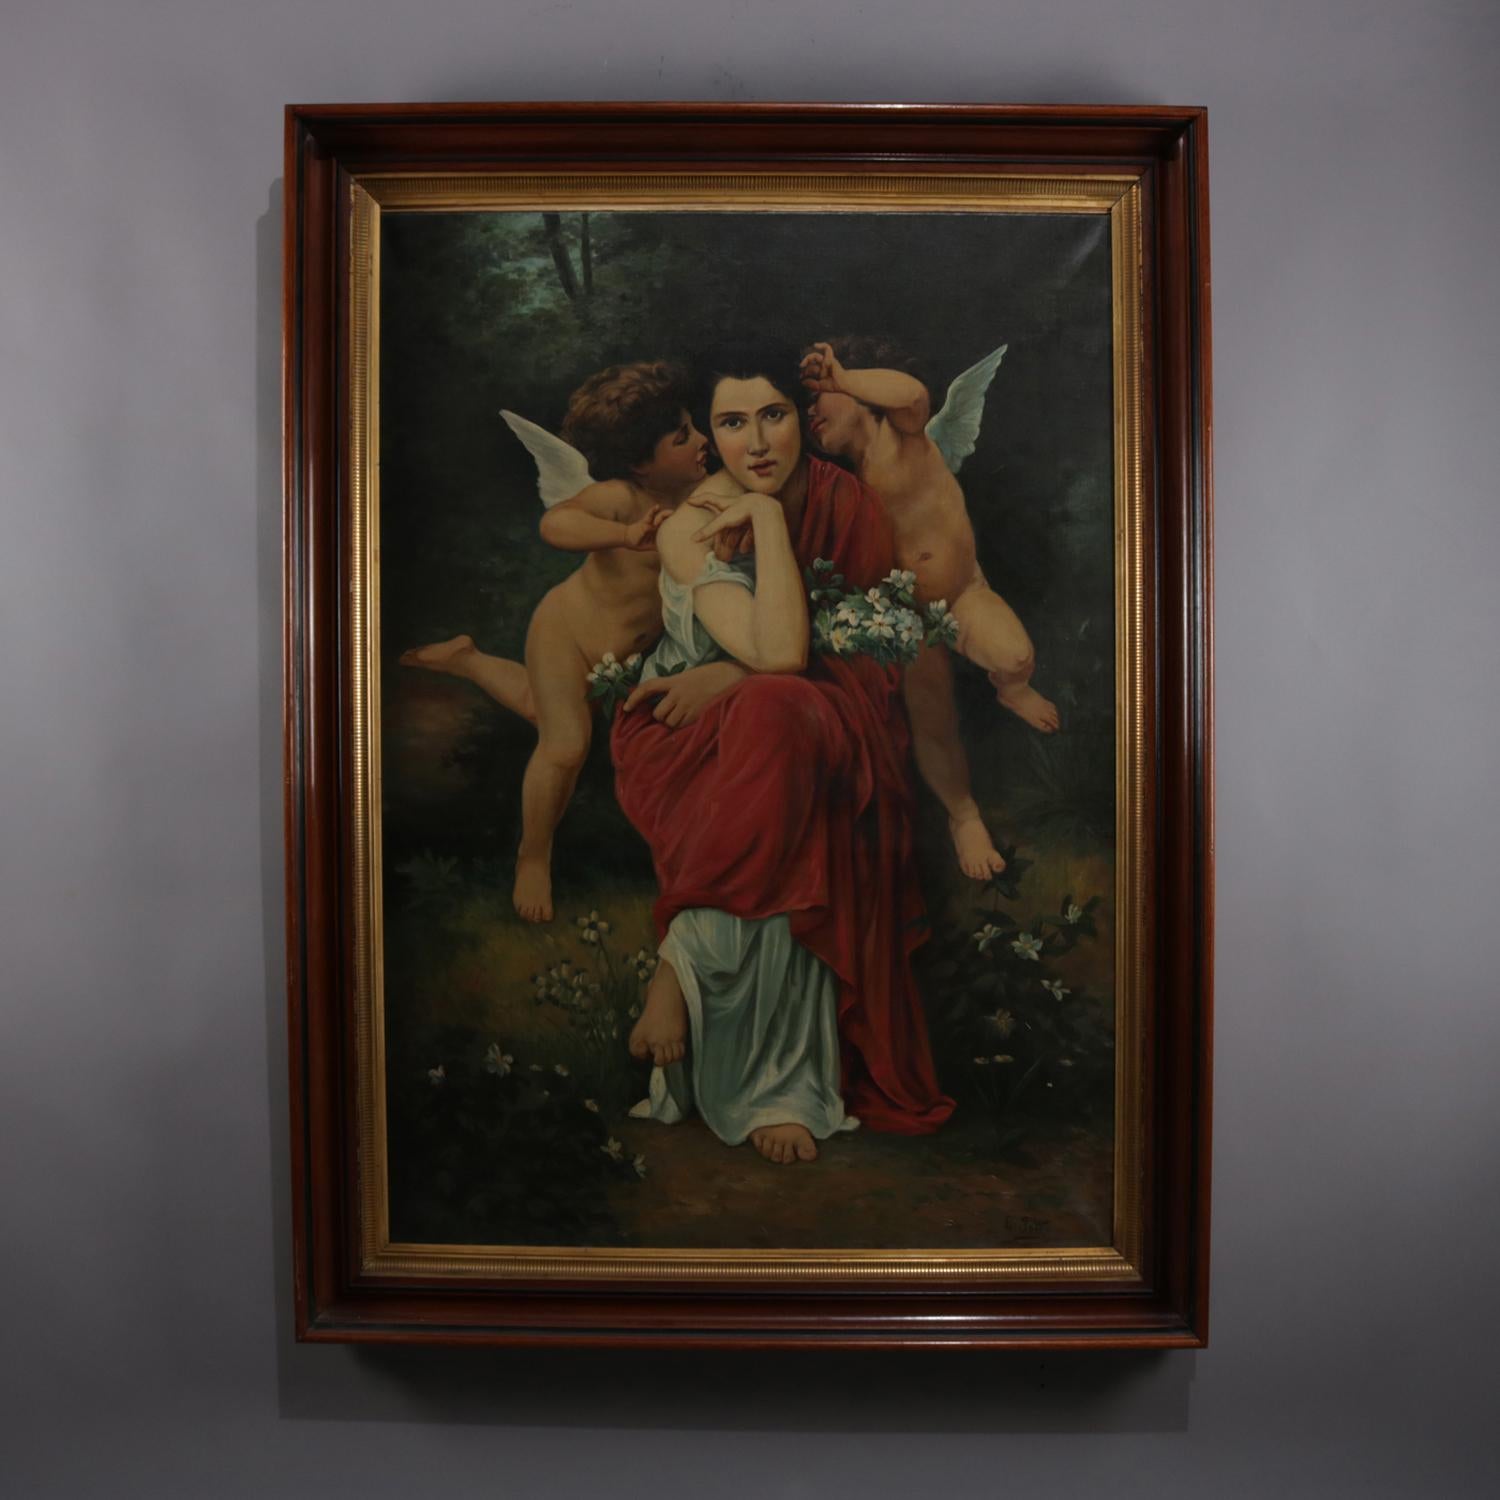 An Italian antique allegorical old master oil on canvas painting depicts neoclassical scene of woman and cherubs, signed L. Toti, circa 1900.

Measures: Overall 59